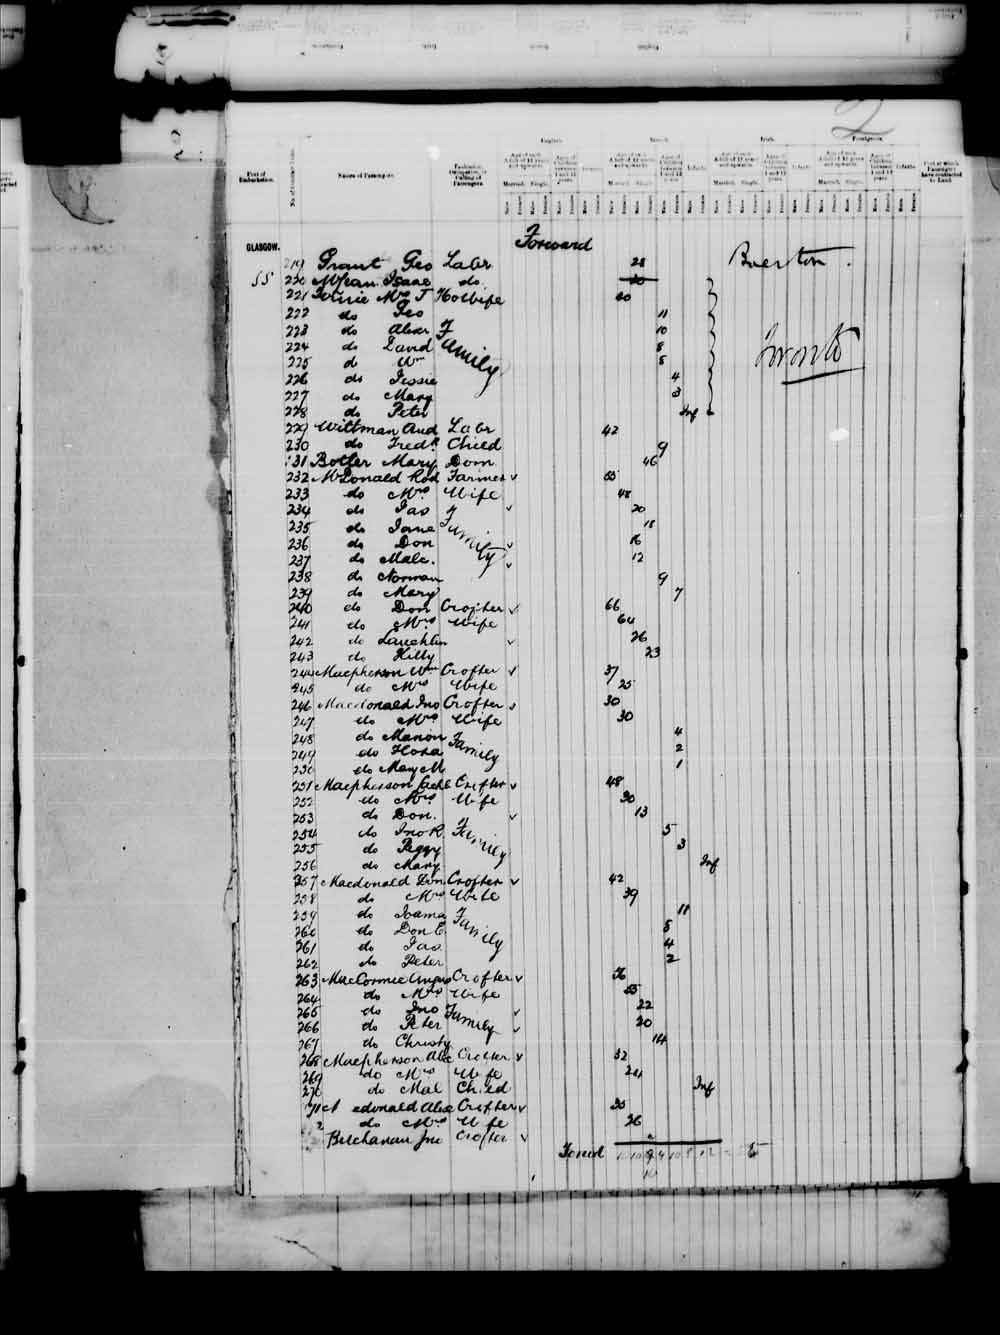 Digitized page of Passenger Lists for Image No.: e003542666